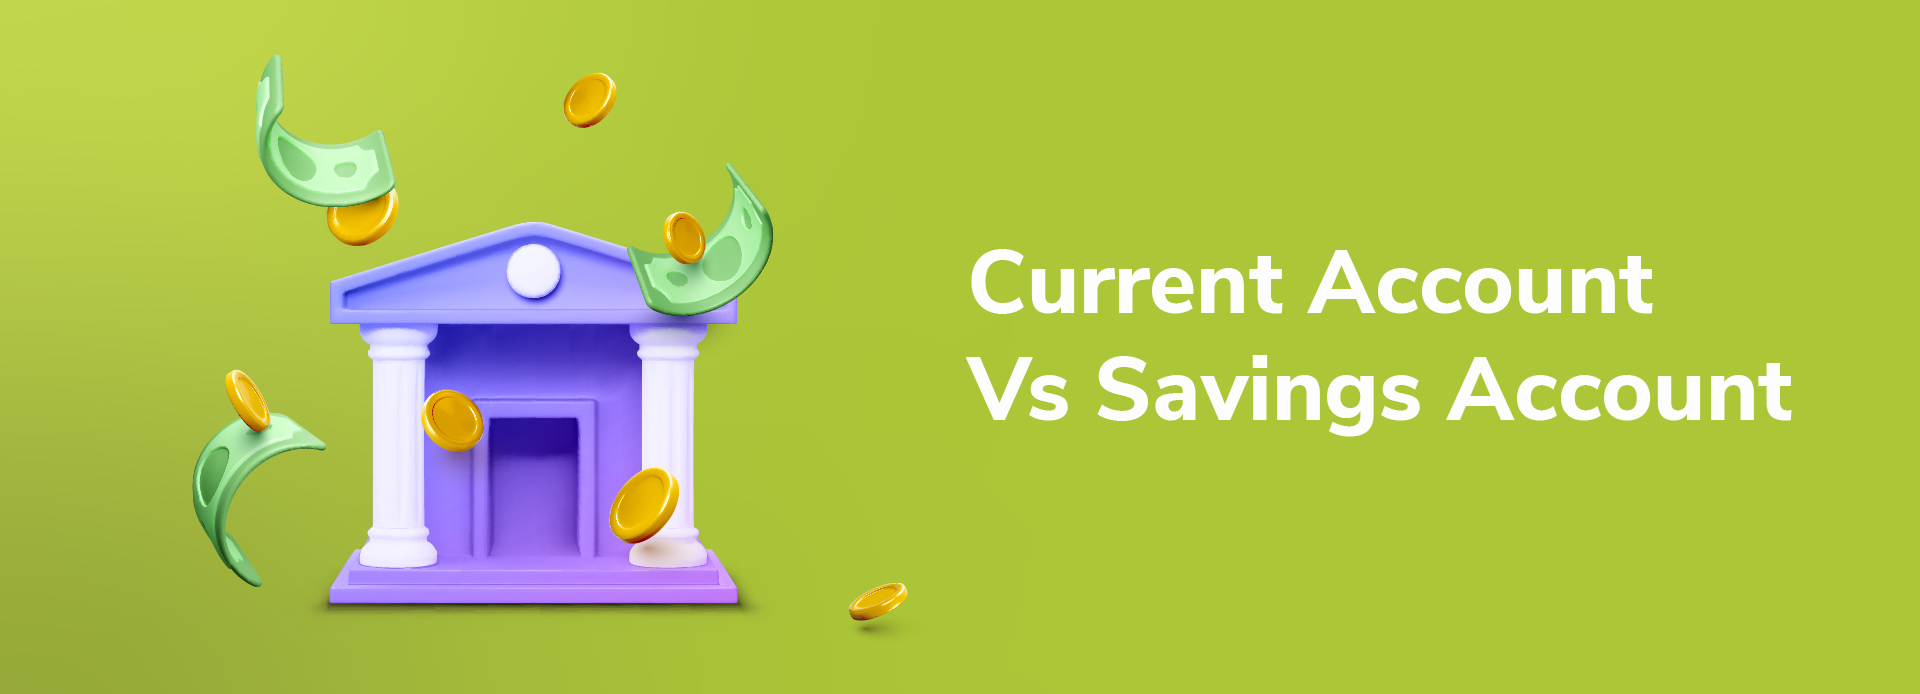 Difference between Current Account and Savings Account